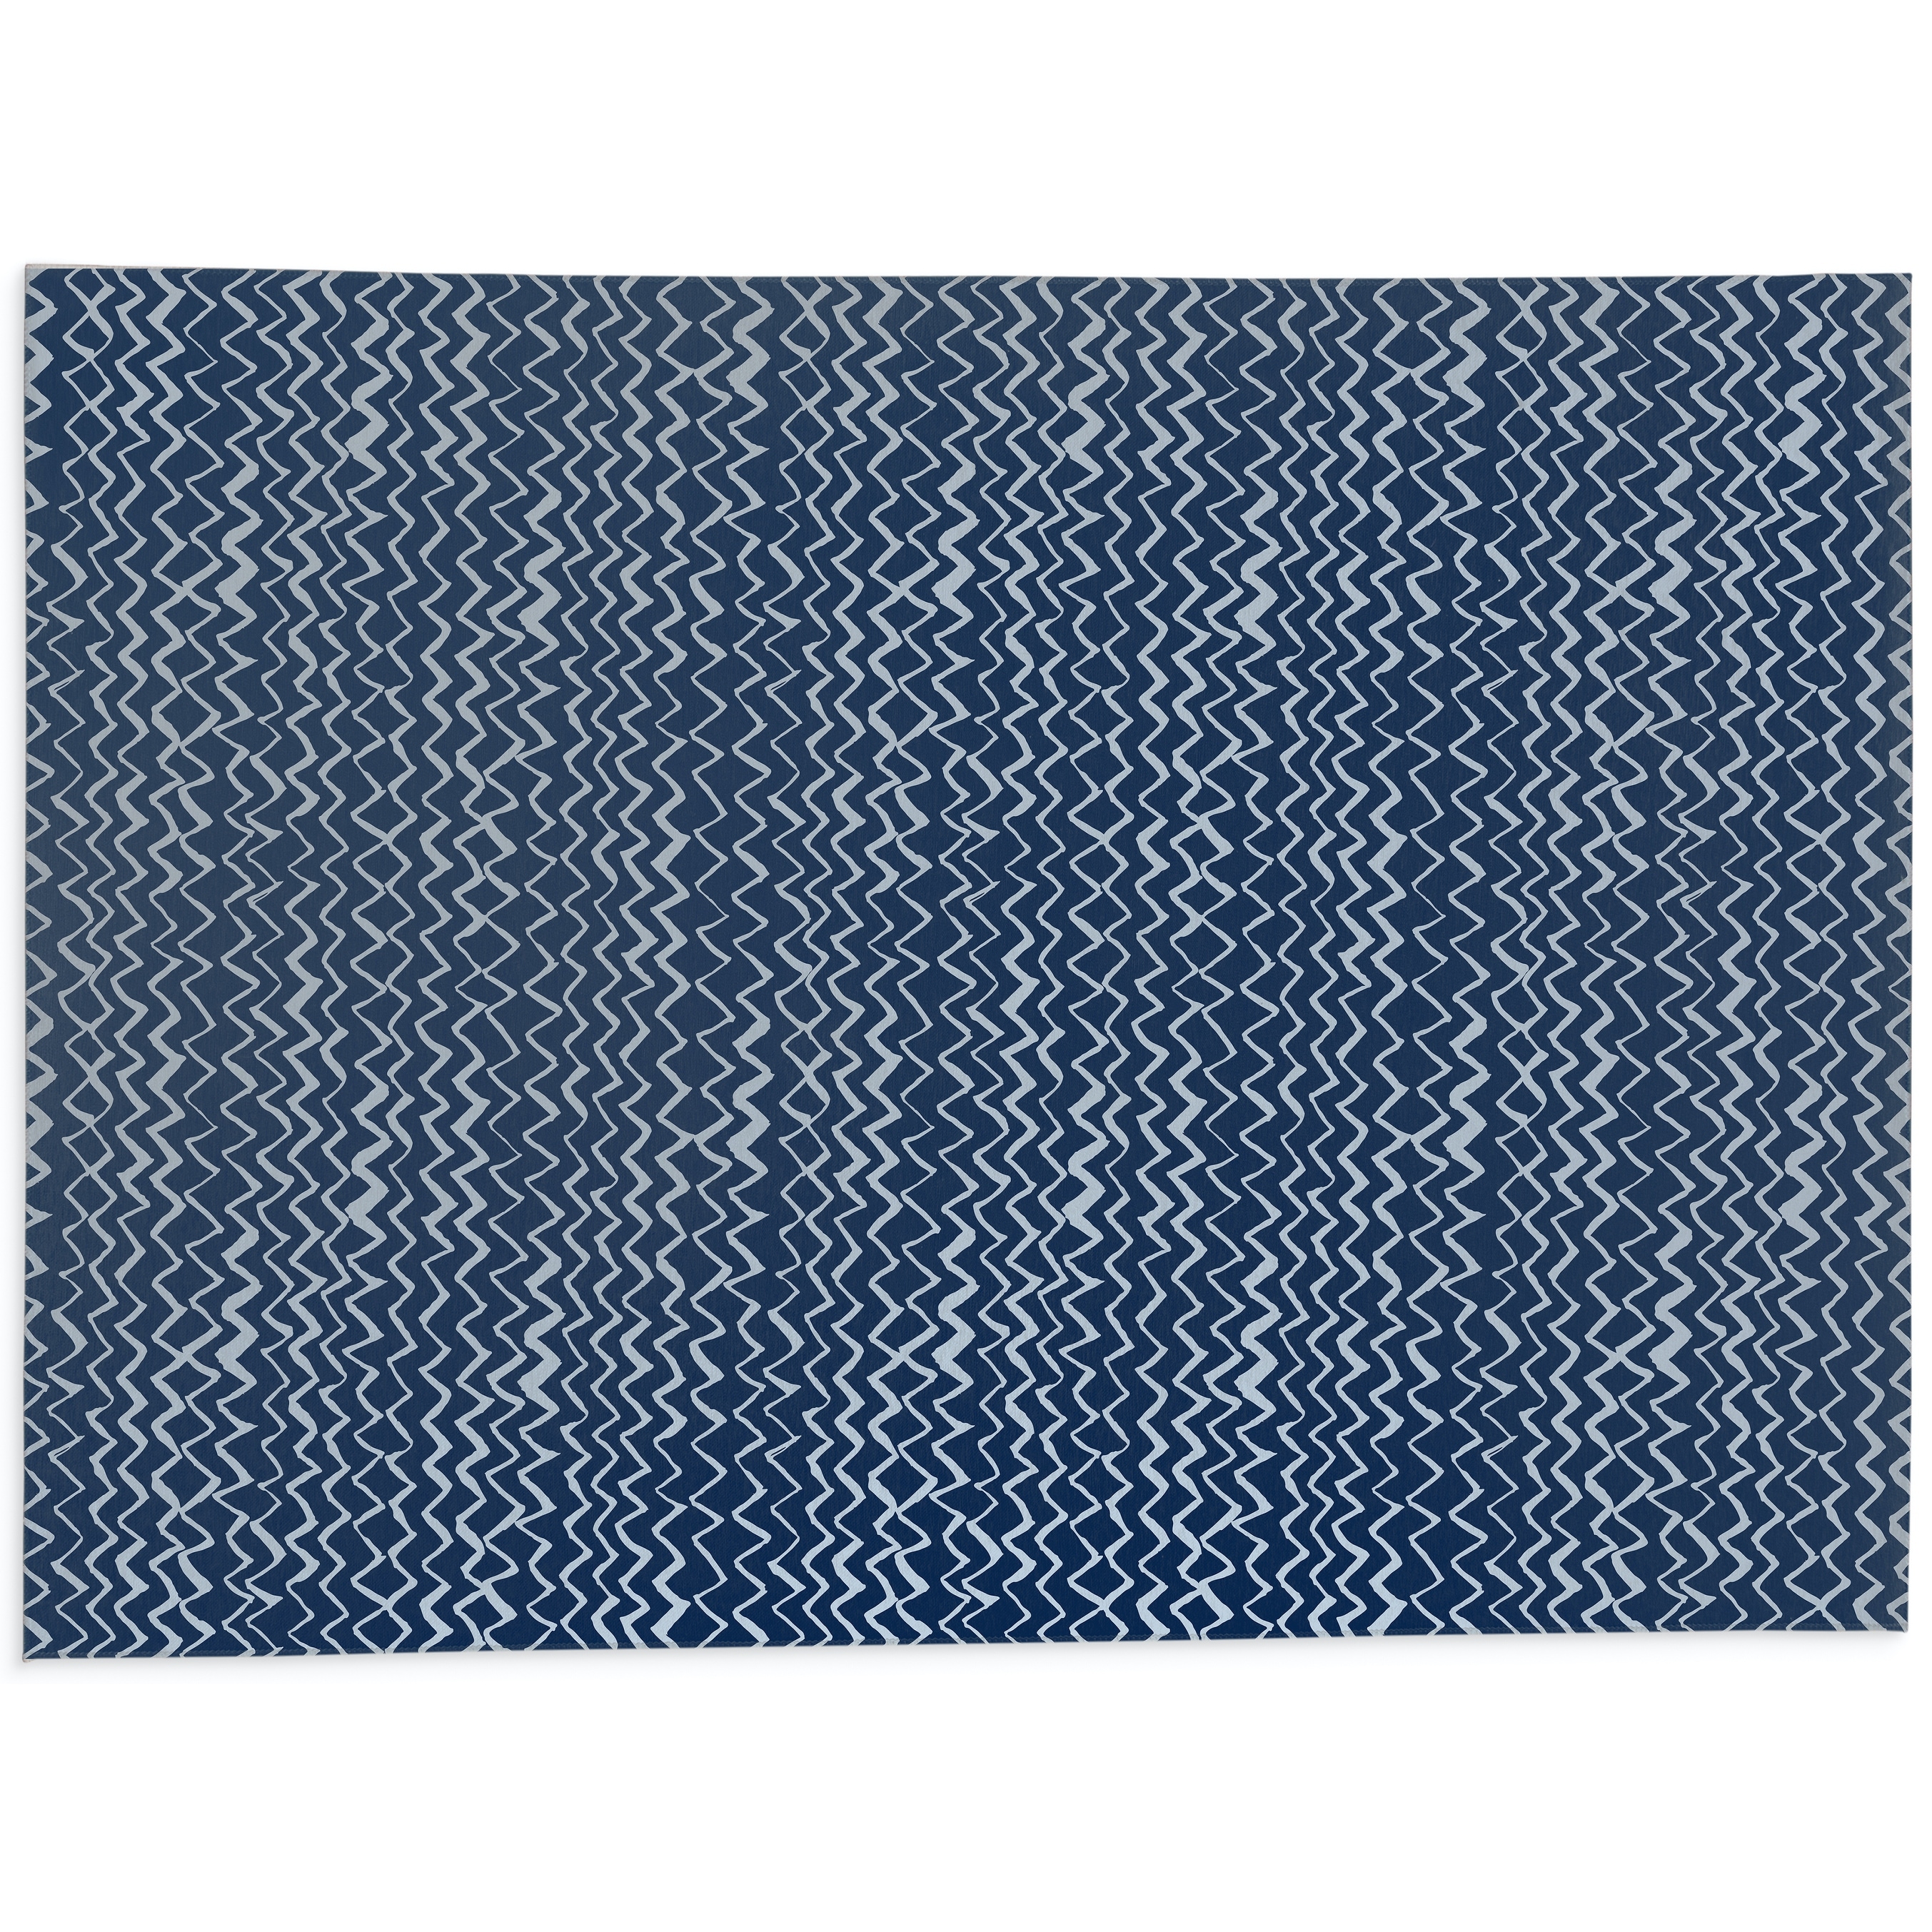 https://ak1.ostkcdn.com/images/products/is/images/direct/956ceb26ac71712bb56917bfc16353e5023a11cb/CHEVRON-MOUNTAINS-NAVY-Indoor-Door-Mat-By-Kavka-Designs.jpg